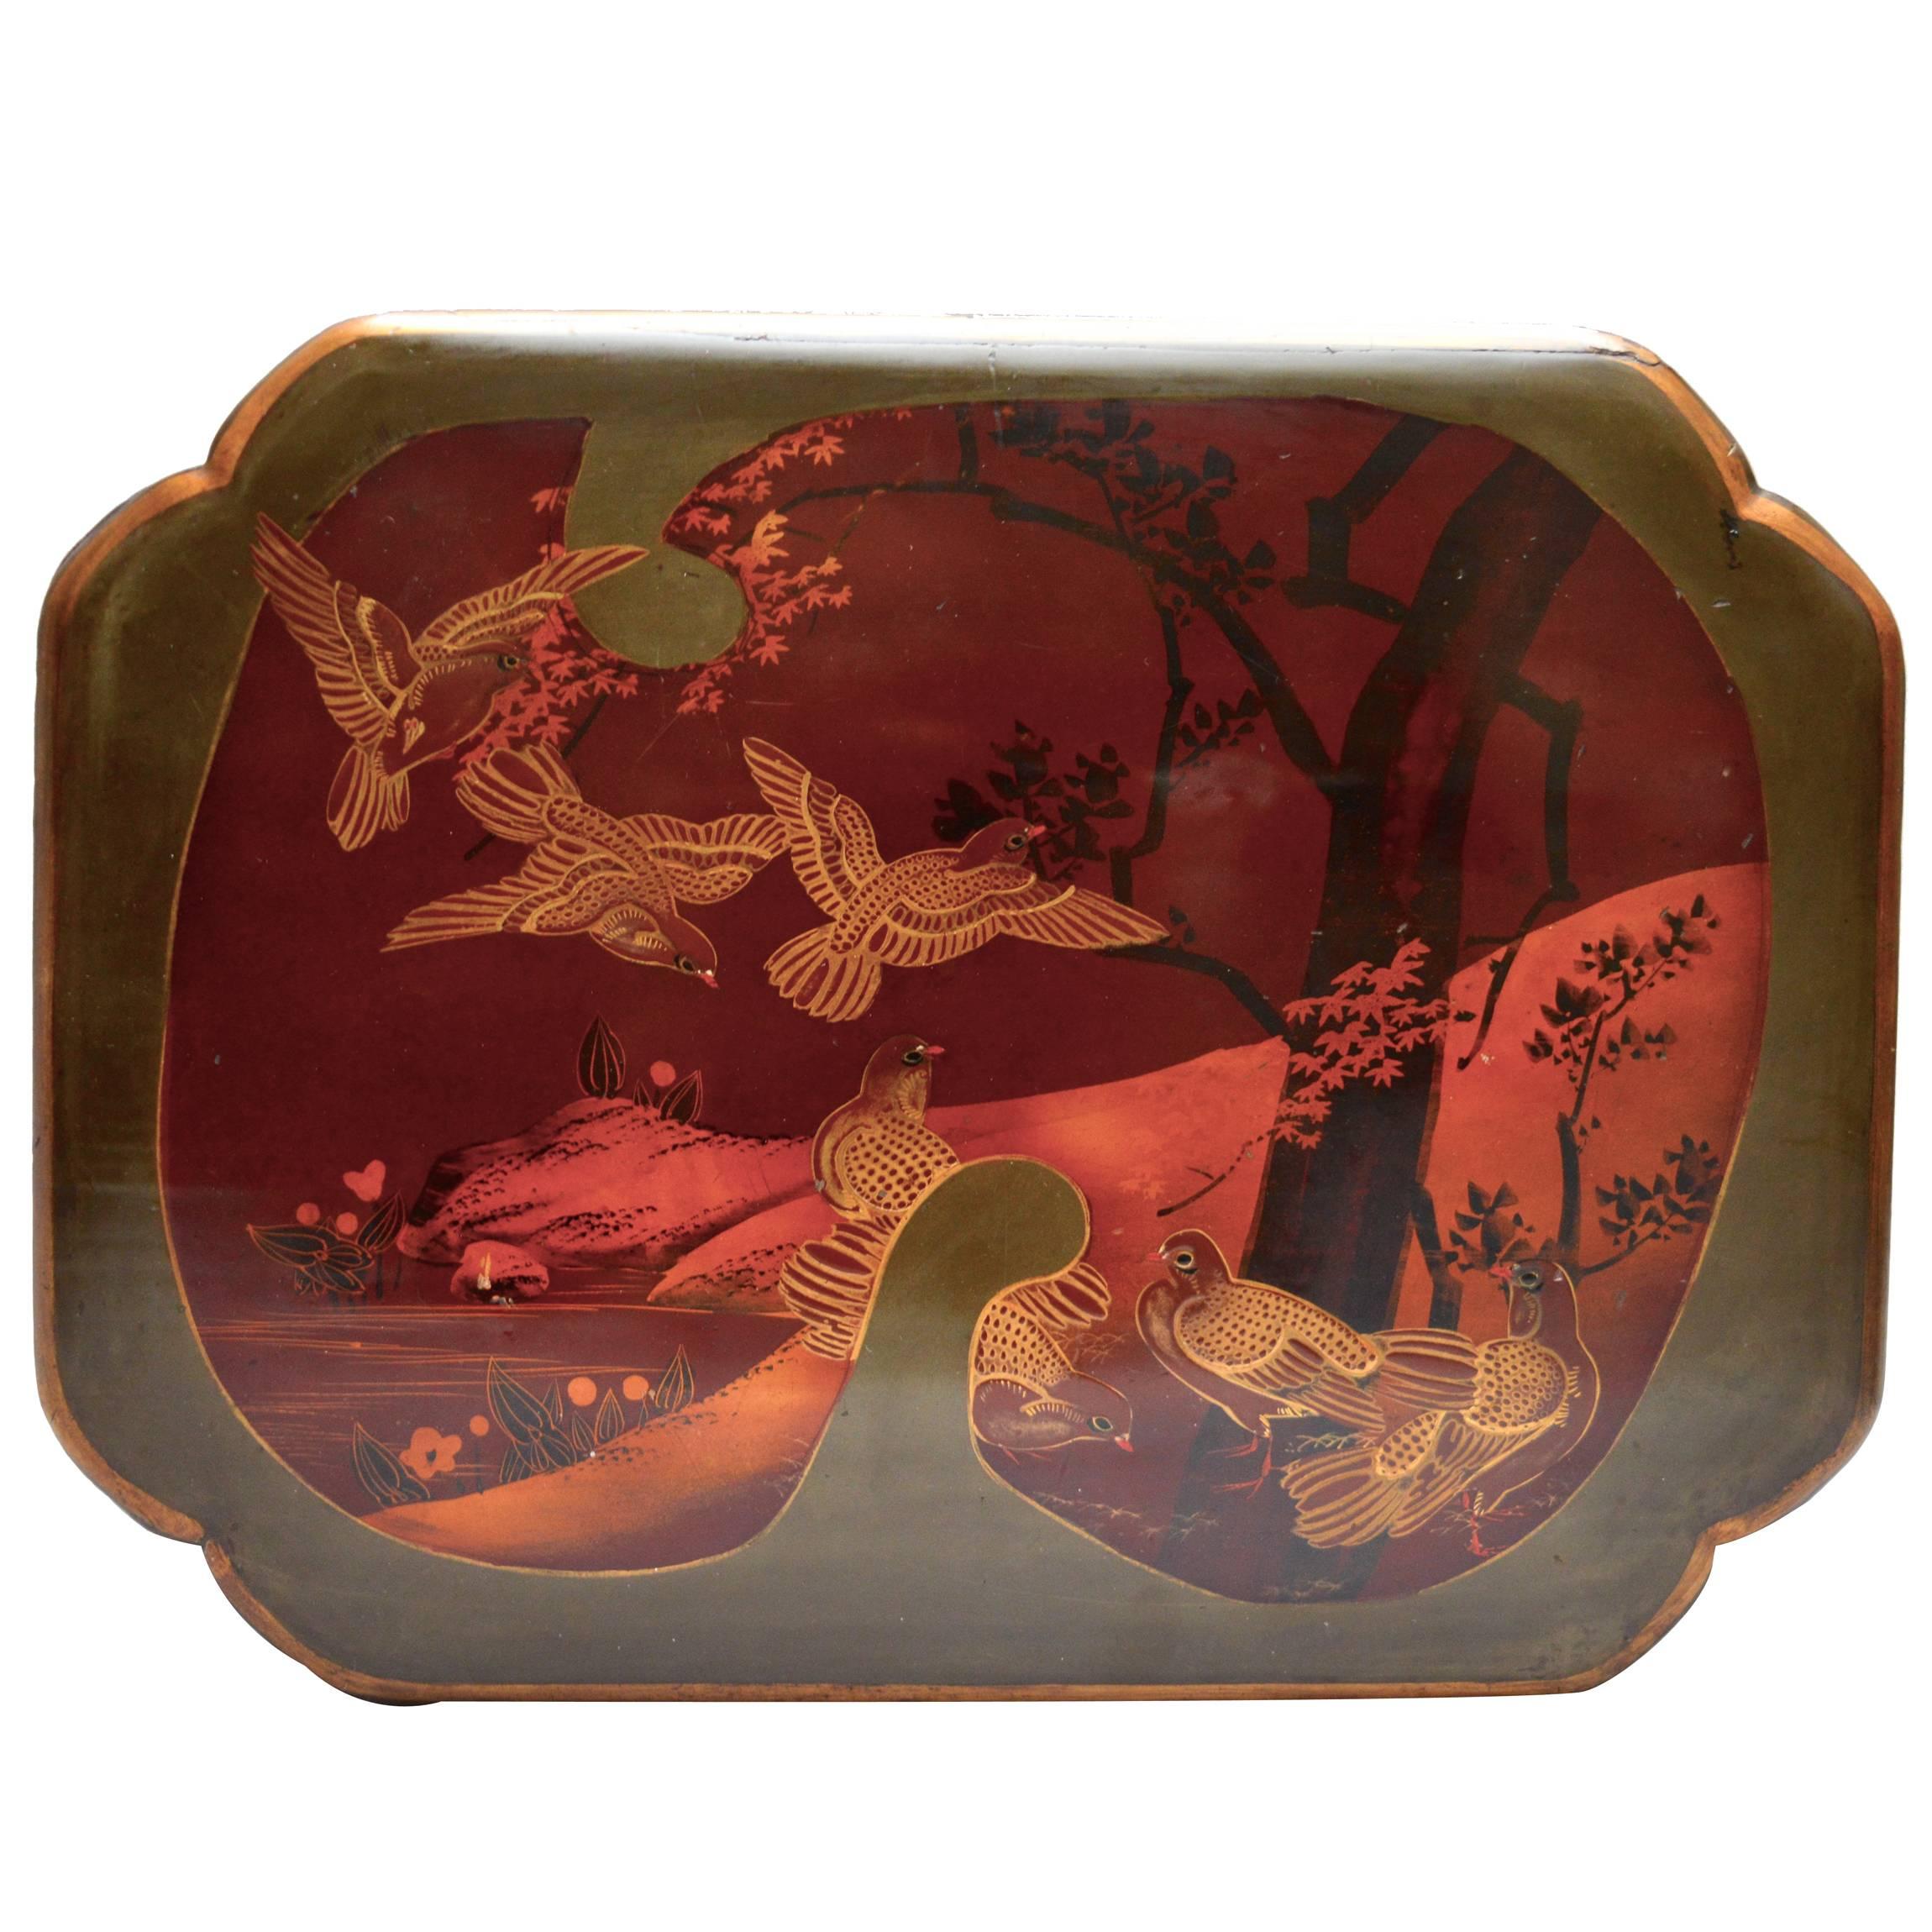 A Japanese Lacquered wood box in an elegant shaped design.
The exterior is decorated with a fine graphic scene which is created in different layers of smooth lacquer paint . 
The box has a detailed bronze fan decorated escheon and the original